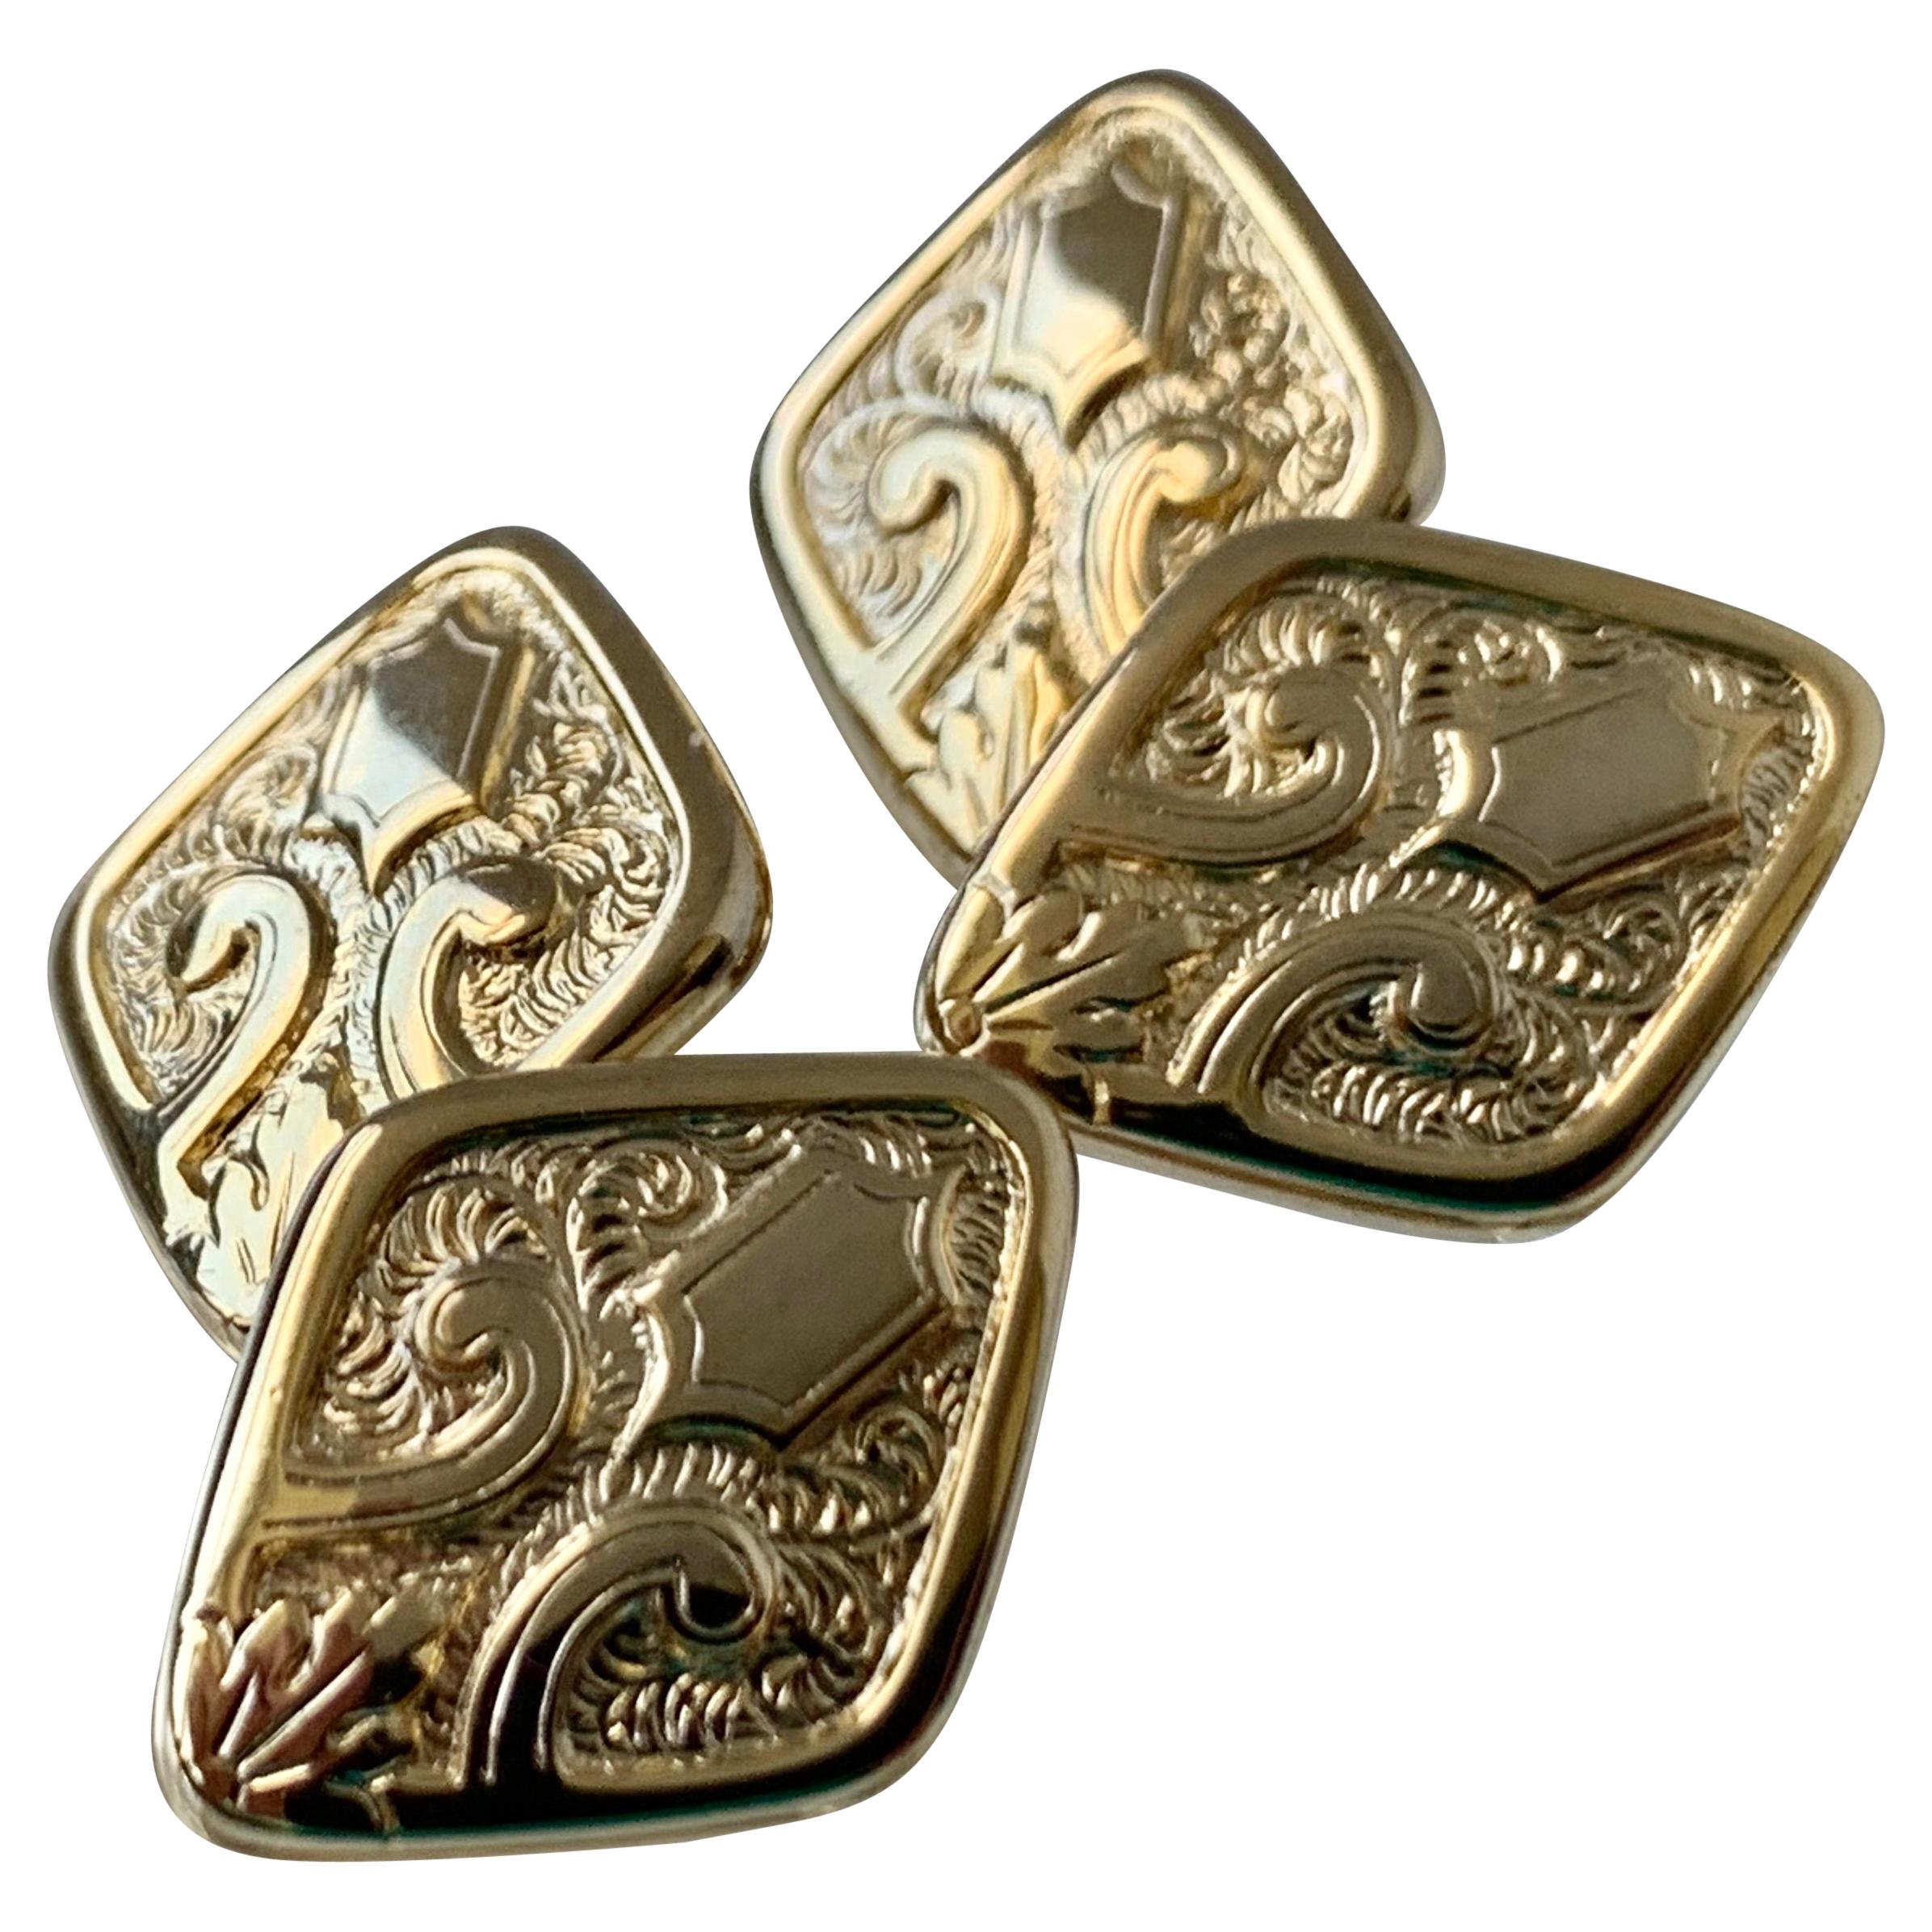 Cufflinks with Double Diamond Shape and Raised Design-A Pair